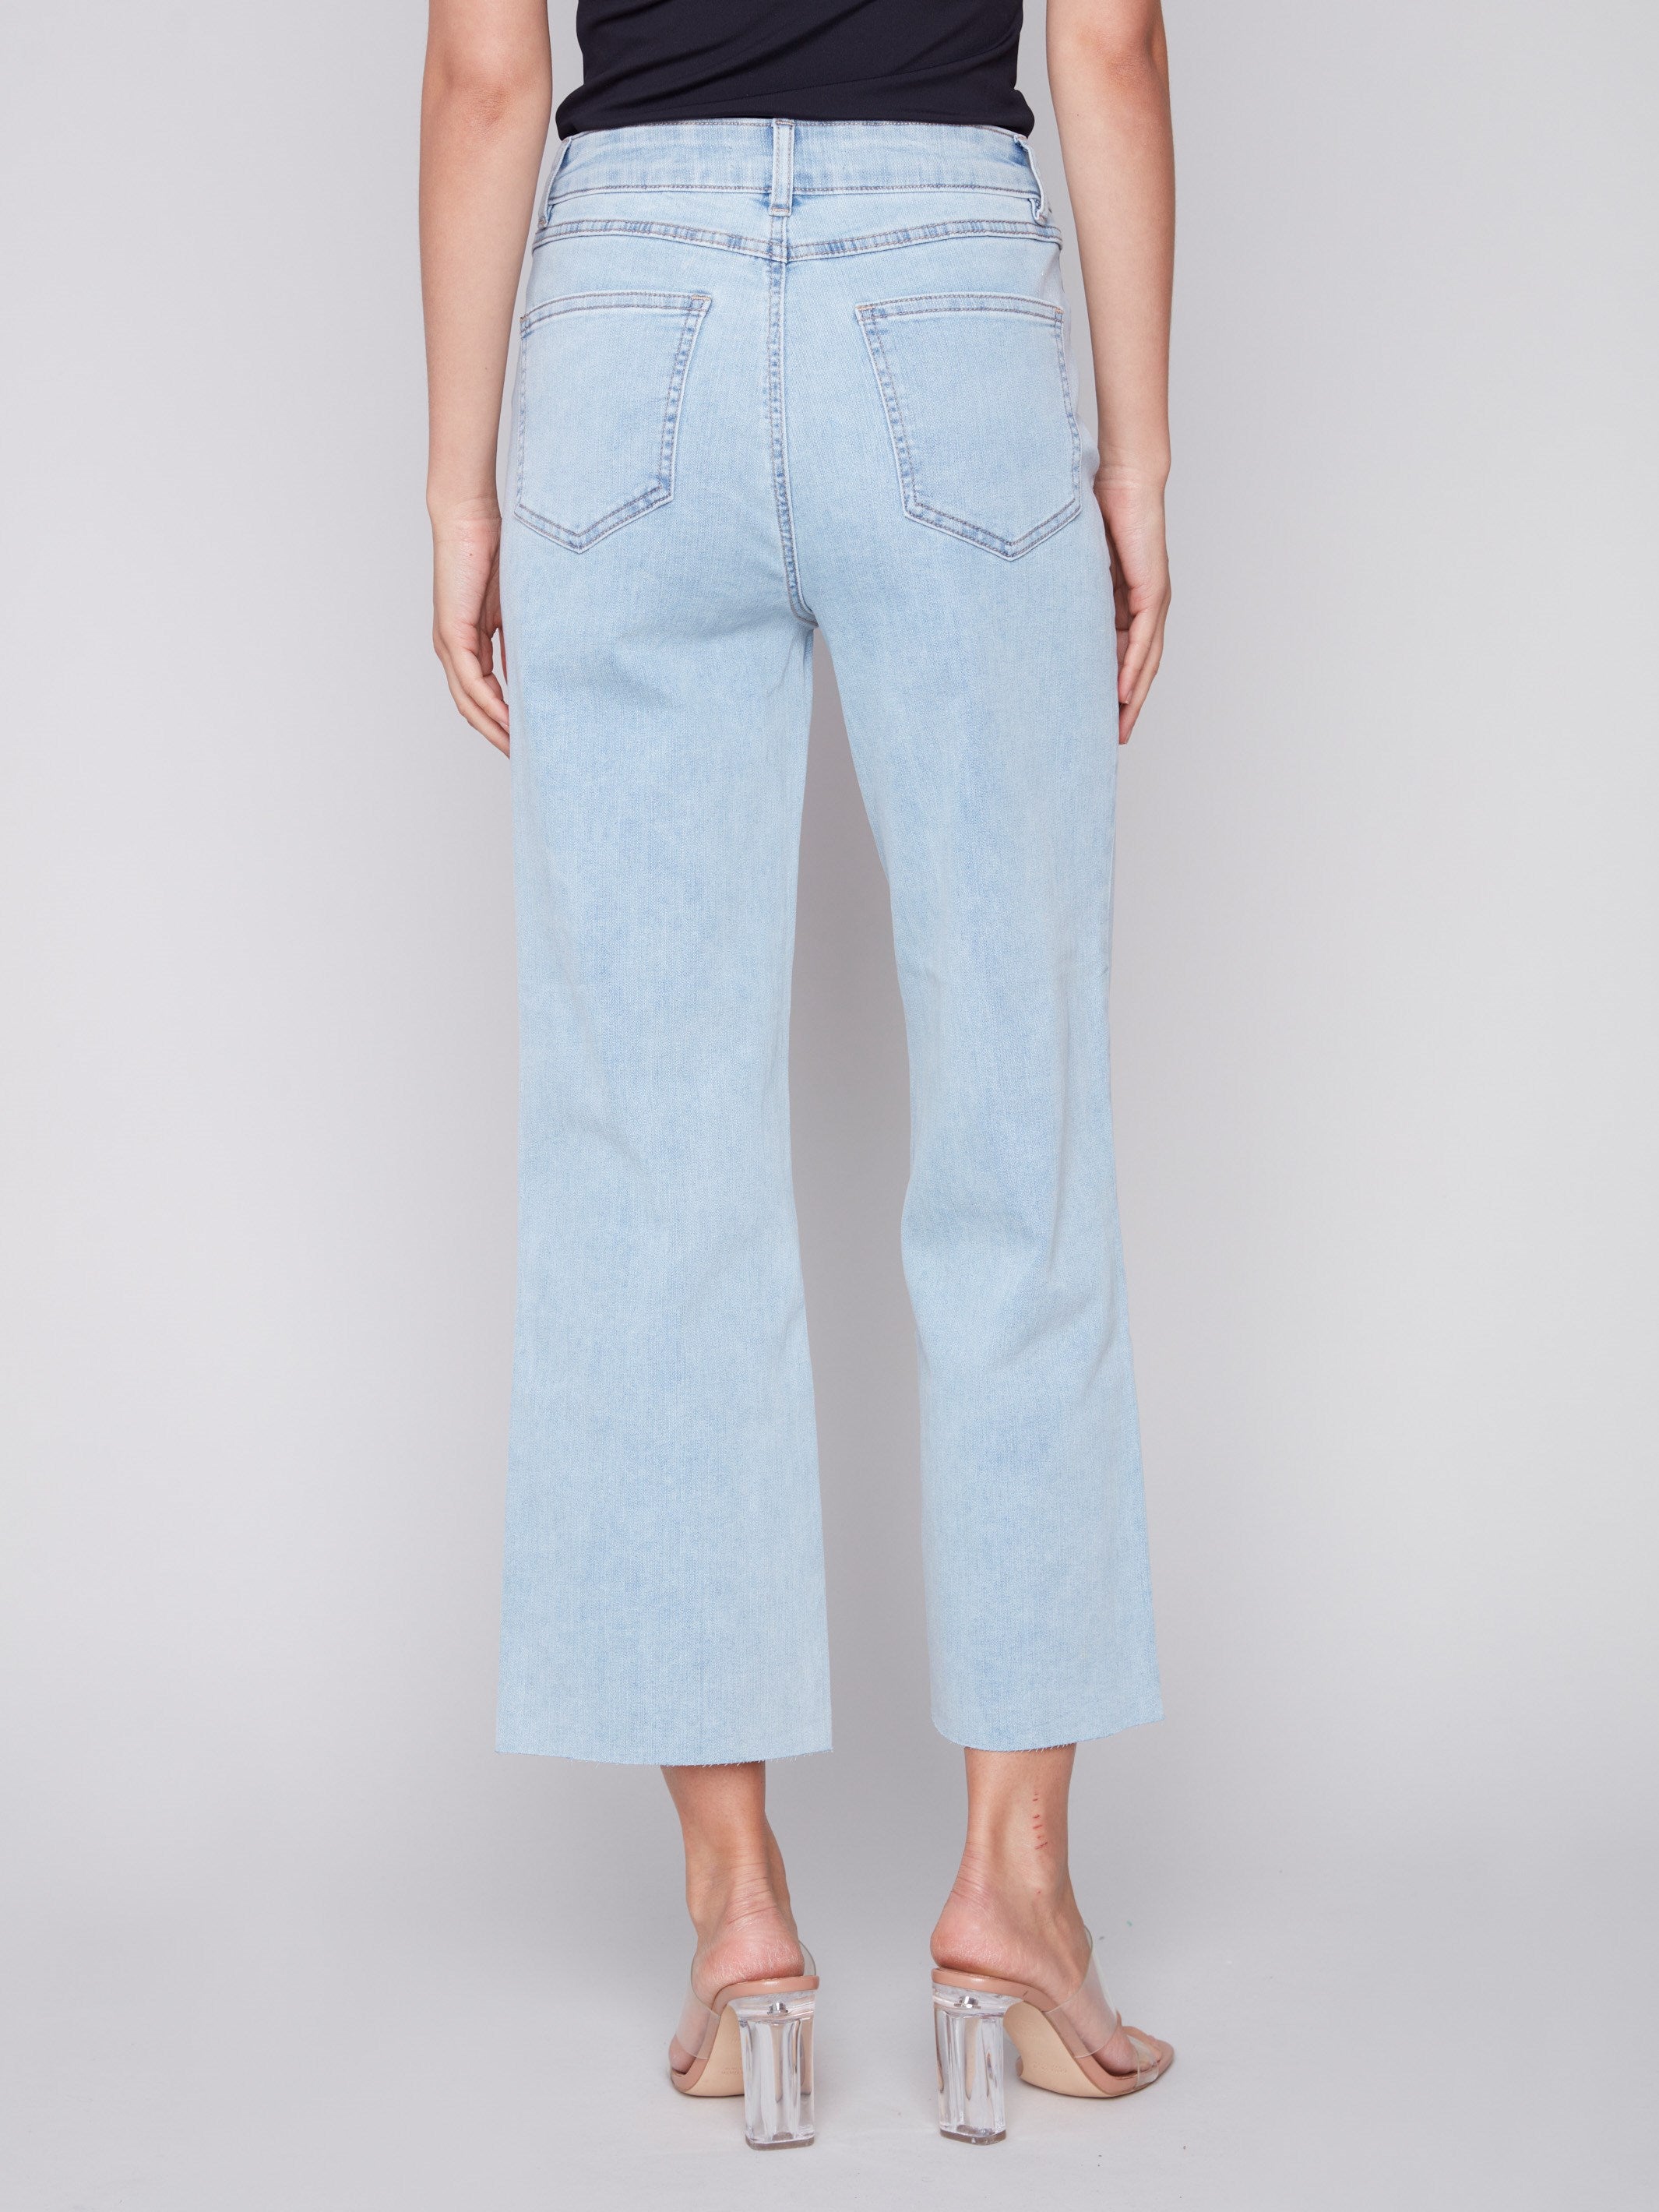 Charlie B Flared Jeans with Raw Edge - Bleach Blue - Image 3